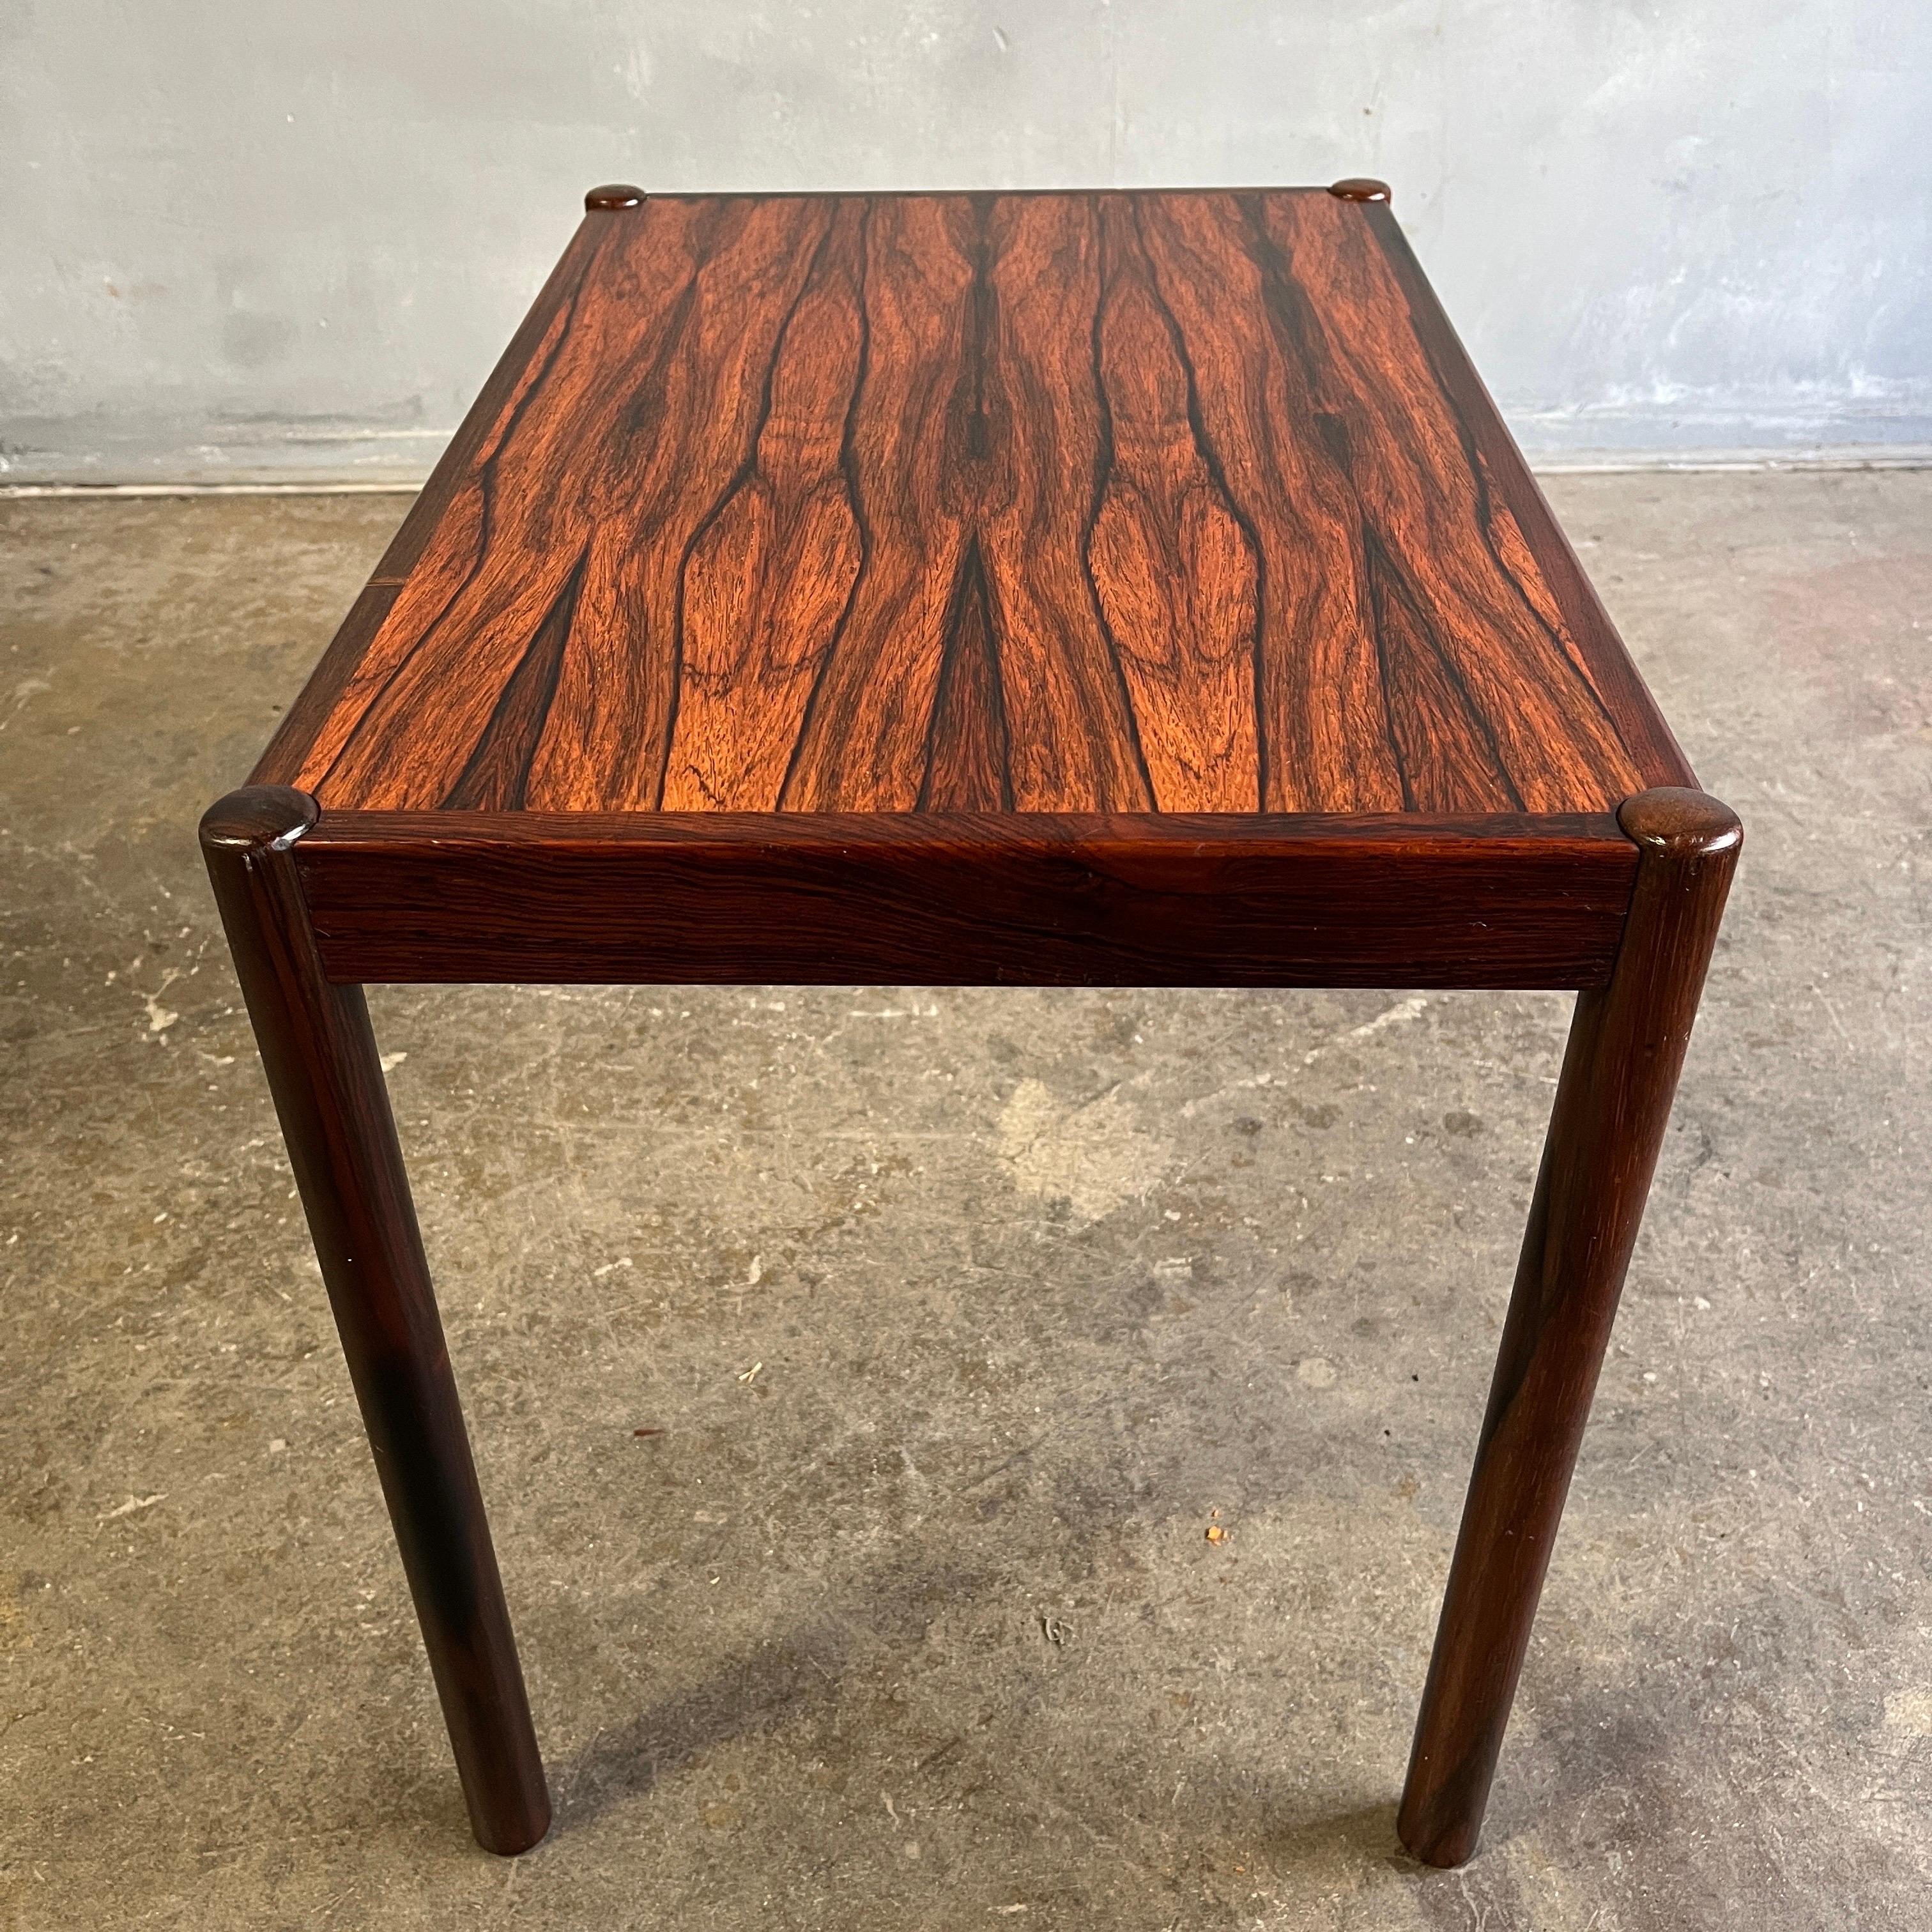 Early 1960s Danish side table with finely figured Brazilian Rosewood. In original condition showing little wear for its age and ready for use. Probably designed by Georg Petersens


Dealer shipping is standard parcel and the legs will be removed.